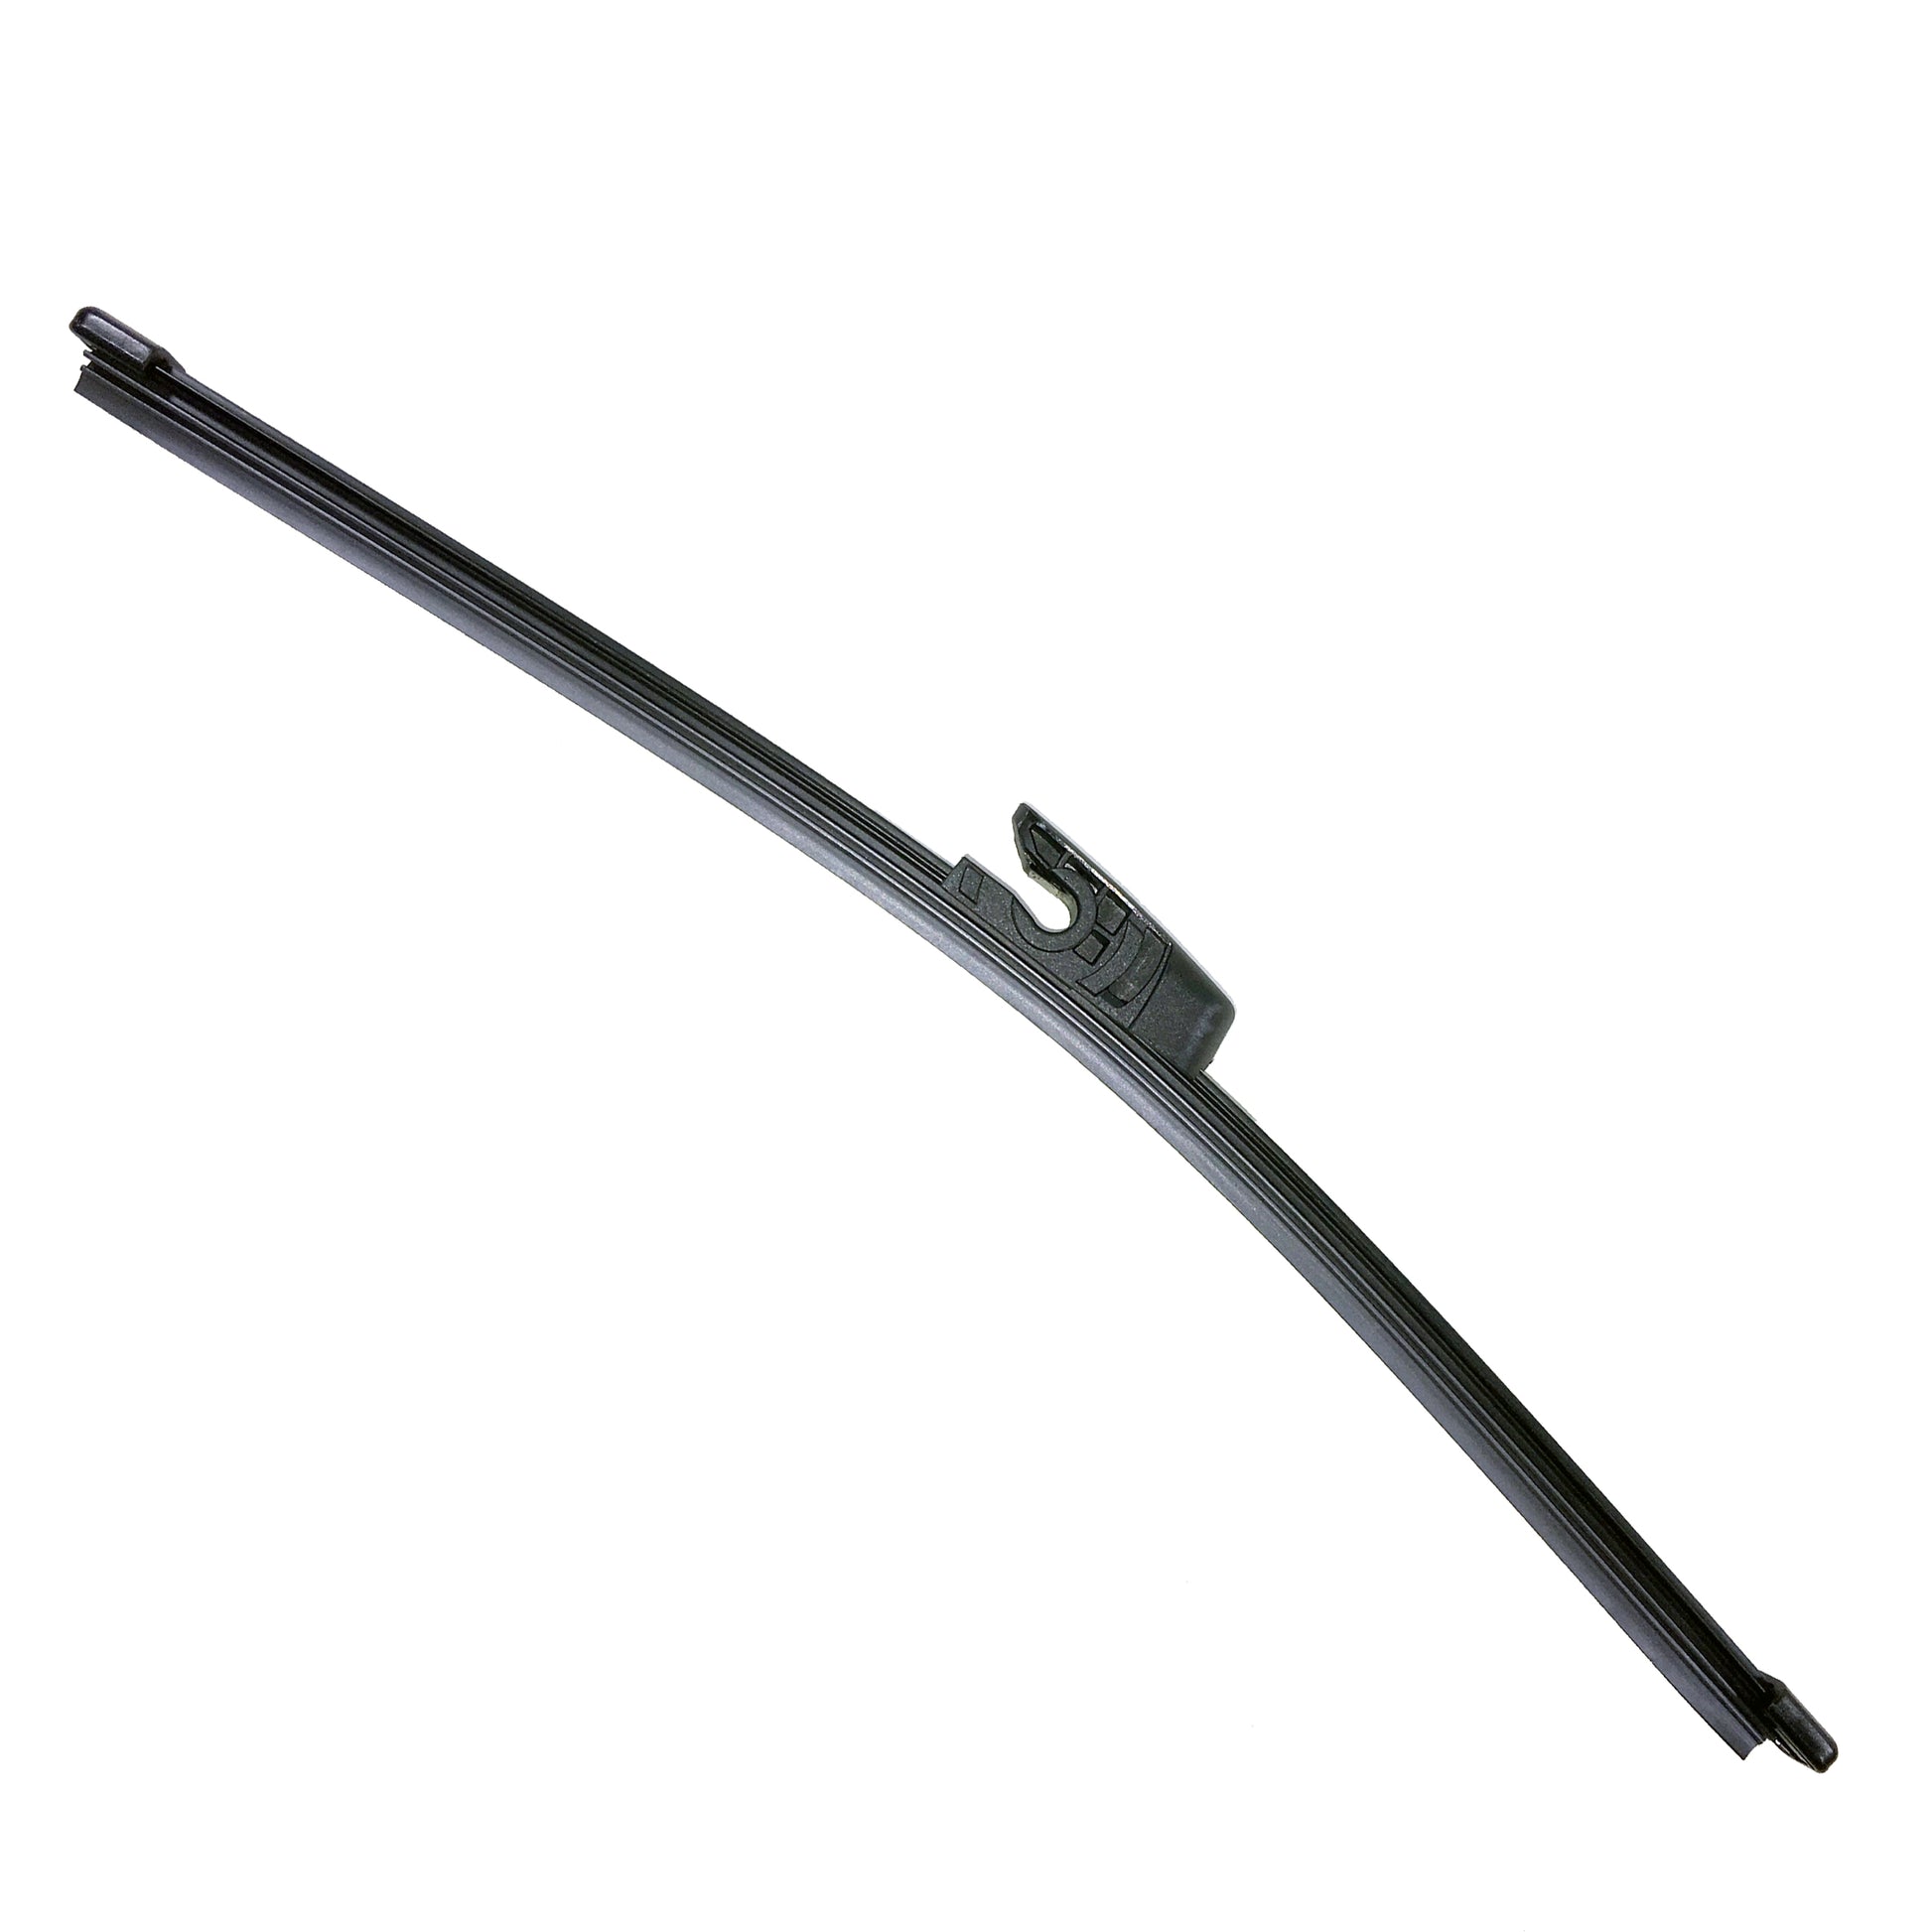 HYUNDAI VELOSTER Coupe Mar 2011 to Sep 2015Rear Wiper Blade 